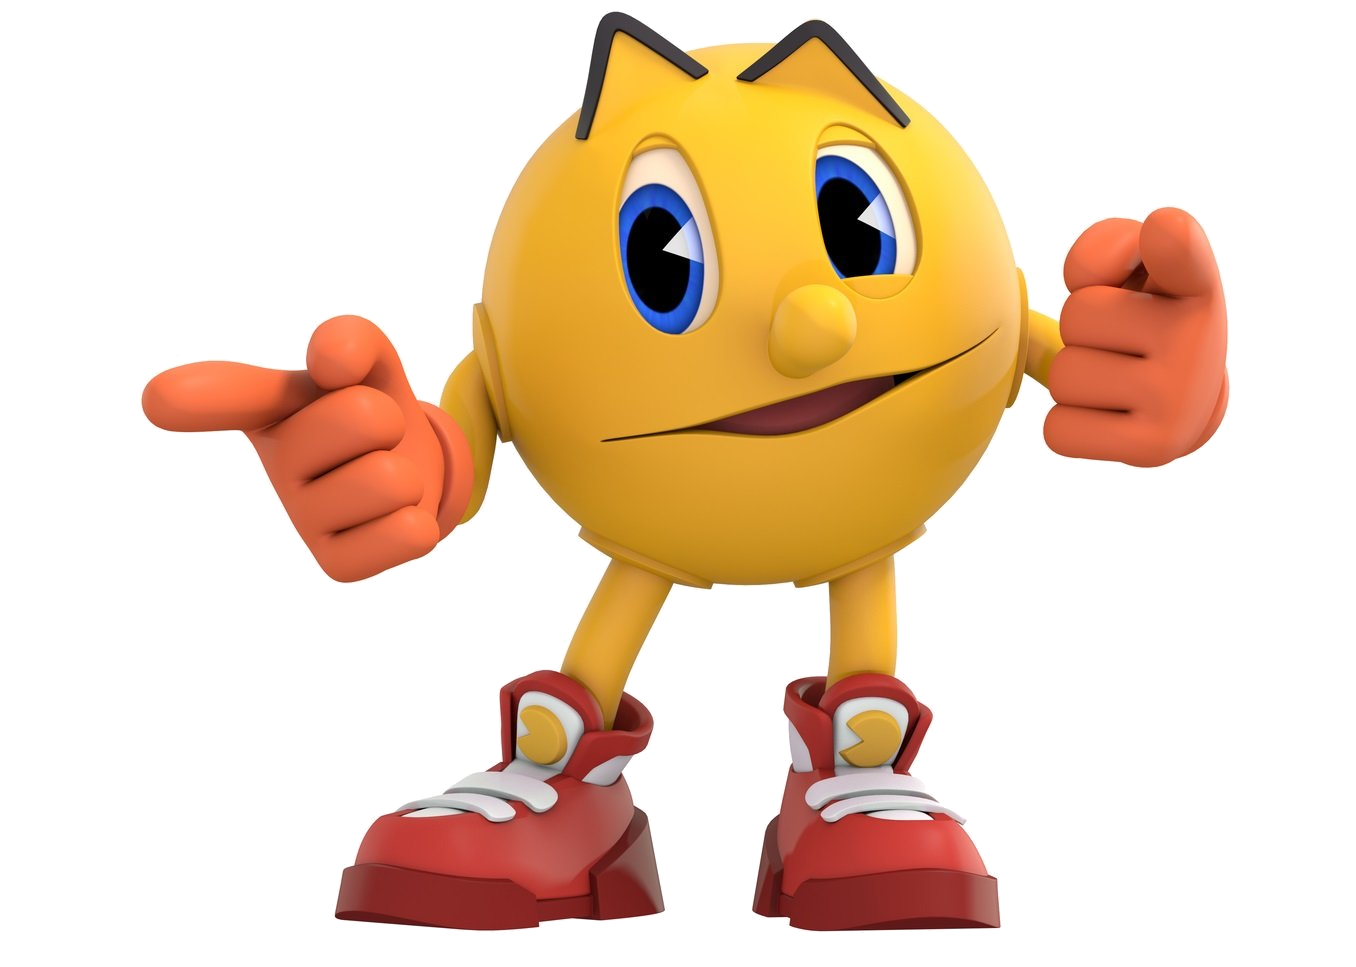 characters from pac man